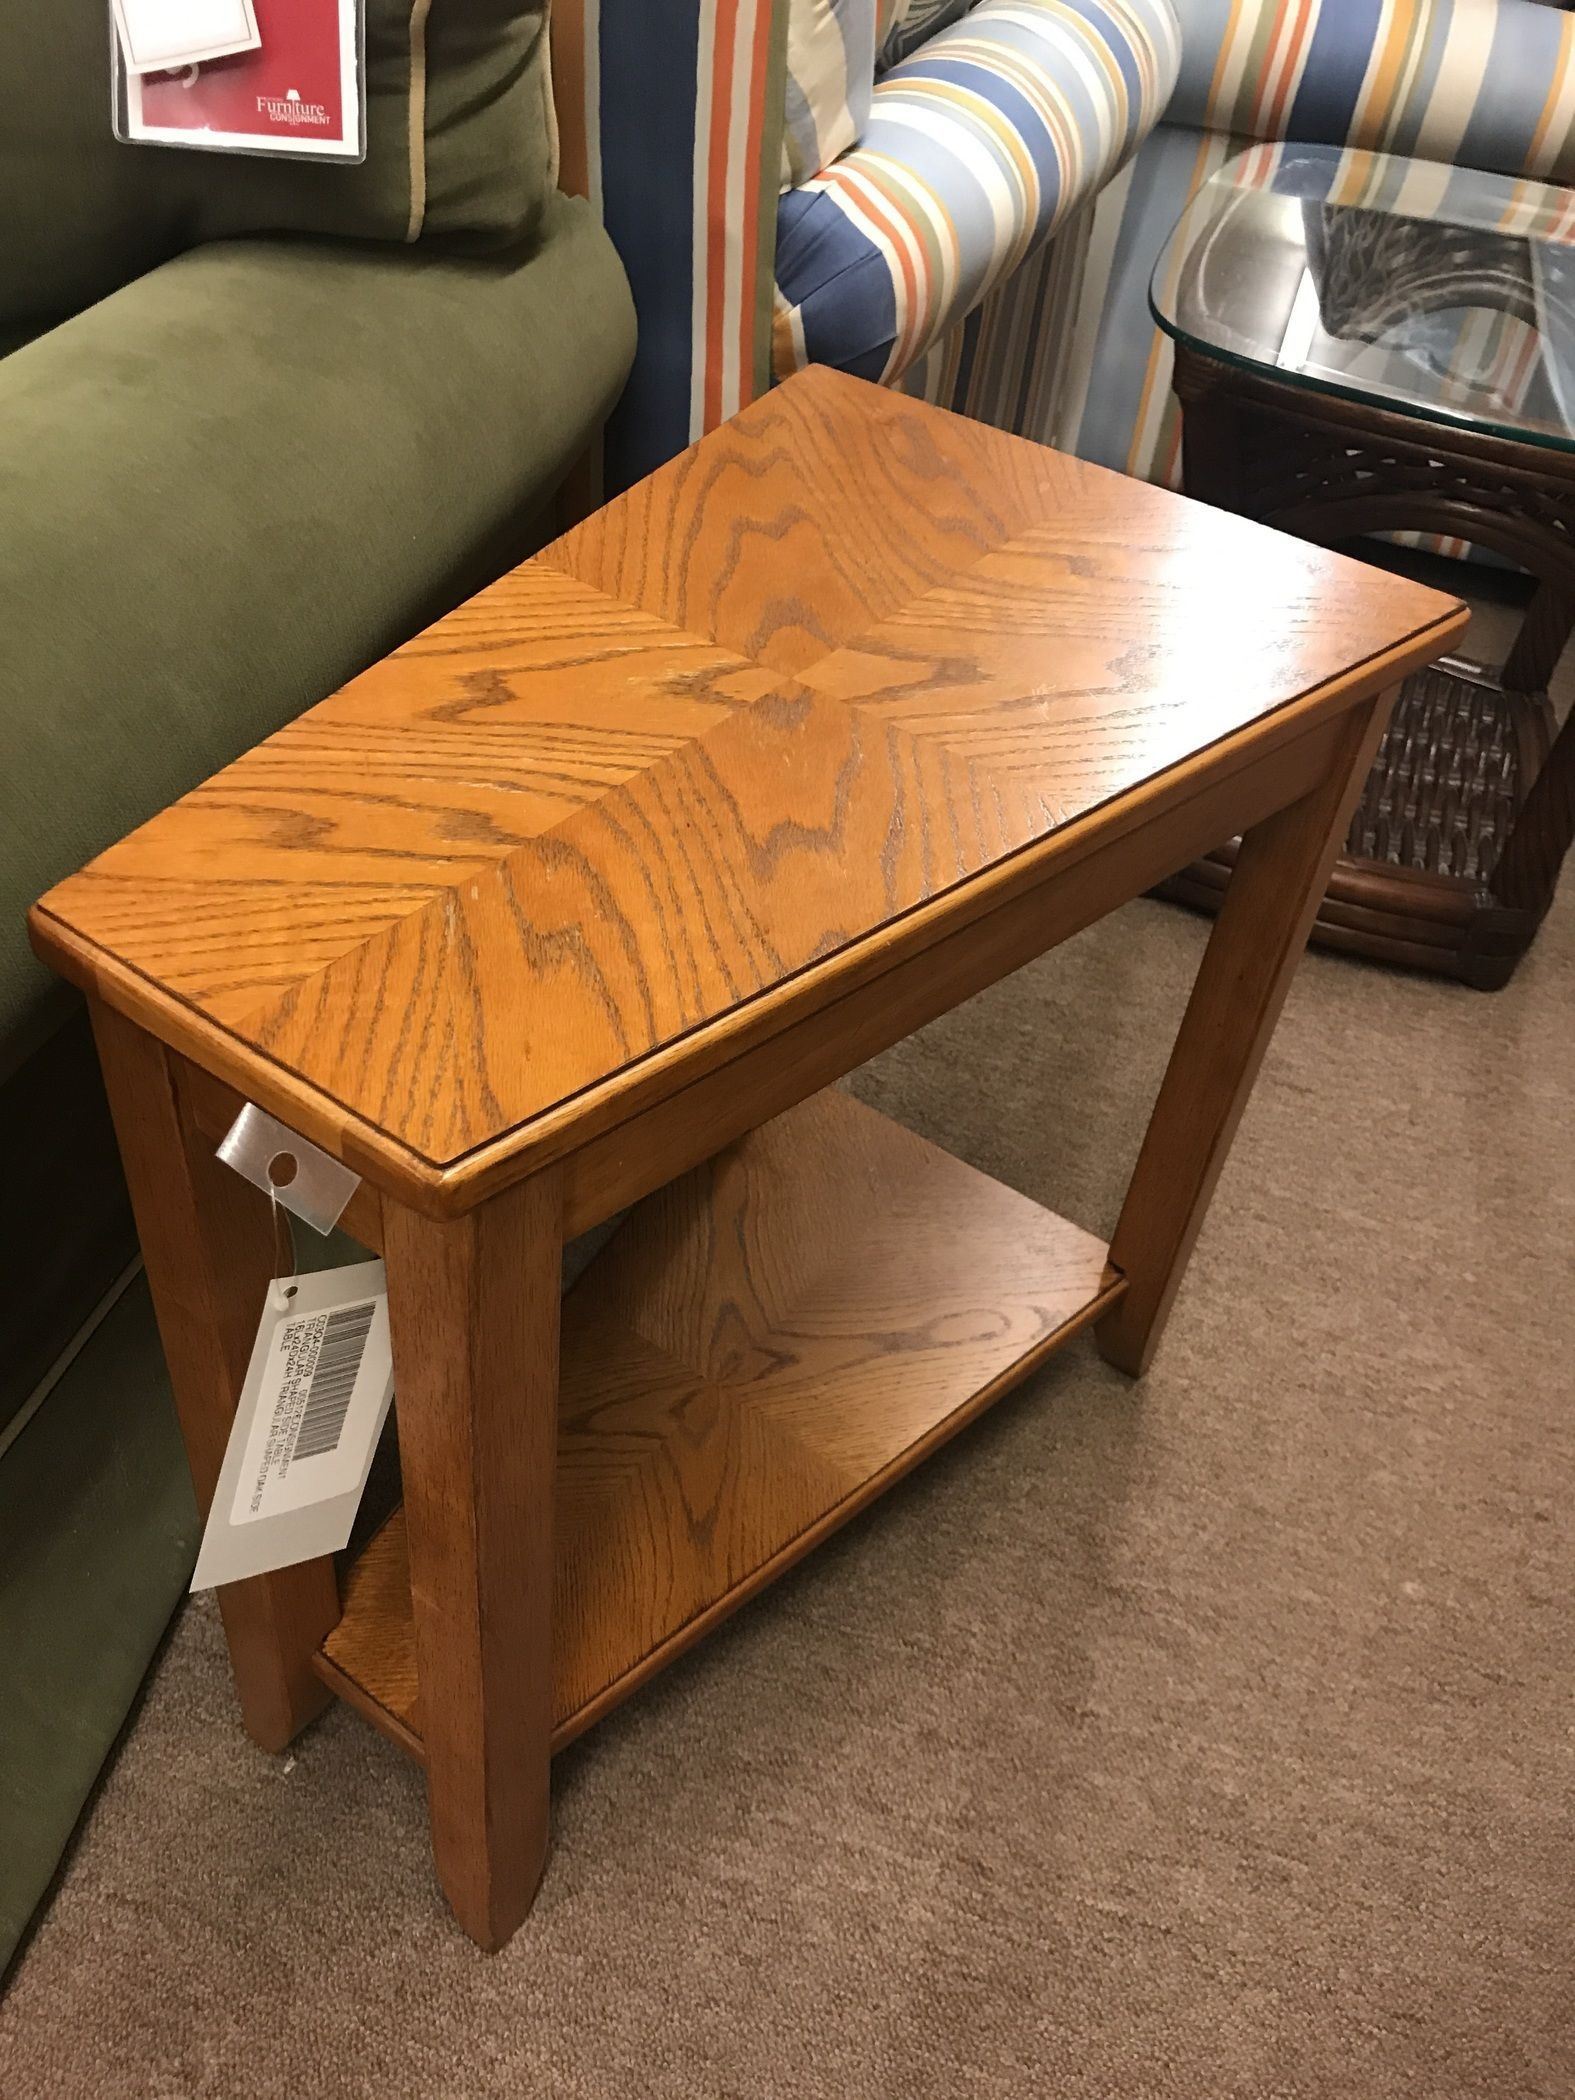 Triangular Shaped Side Table | Delmarva Furniture Consignment Intended For Triangular Console Tables (View 9 of 20)